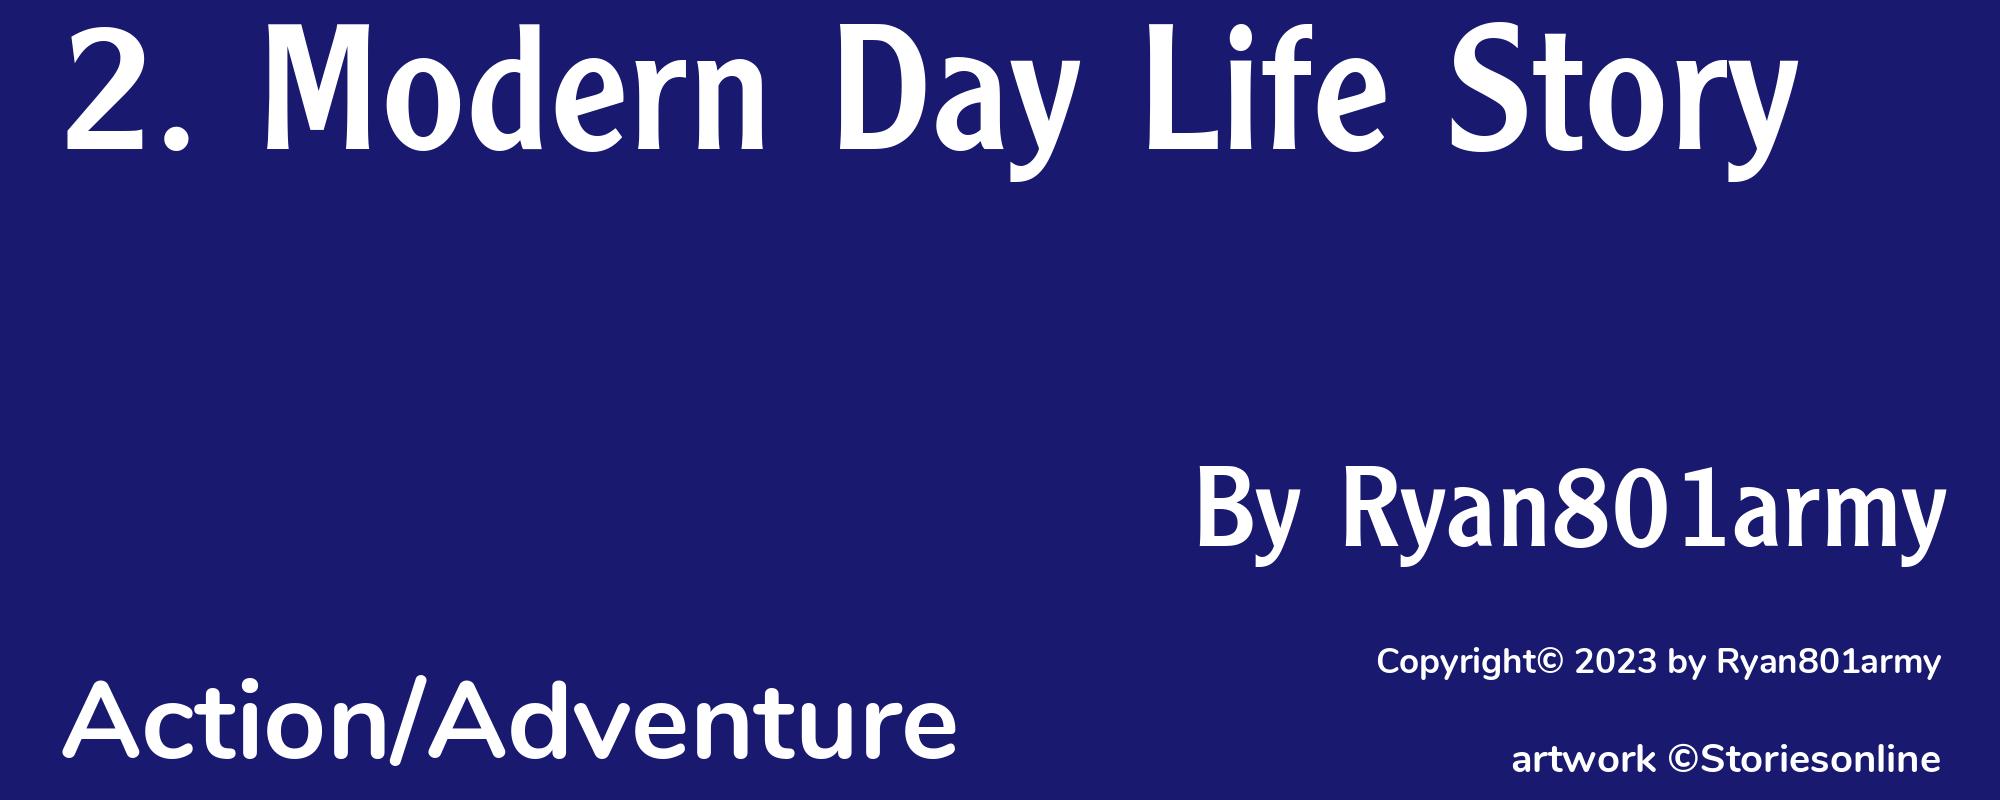 2. Modern Day Life Story - Cover